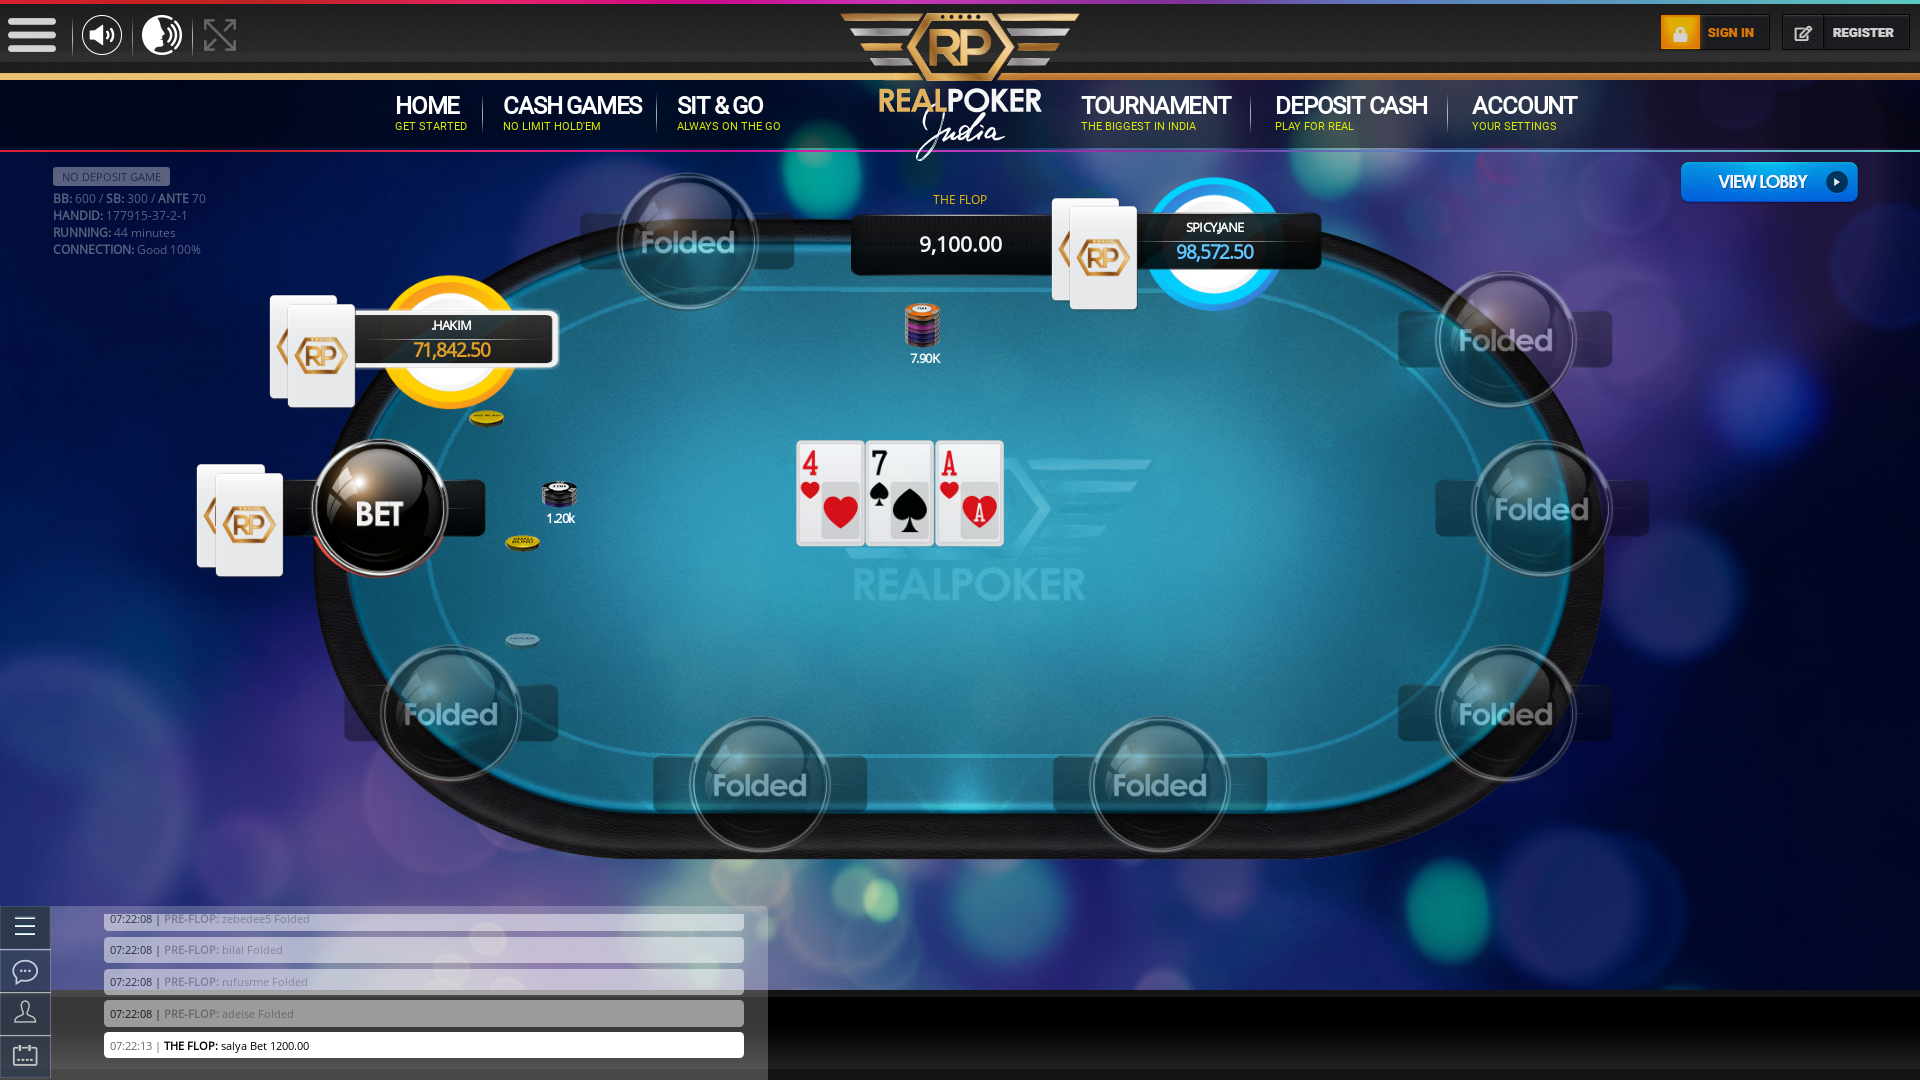 Indian poker on a 10 player table in the 44th minute